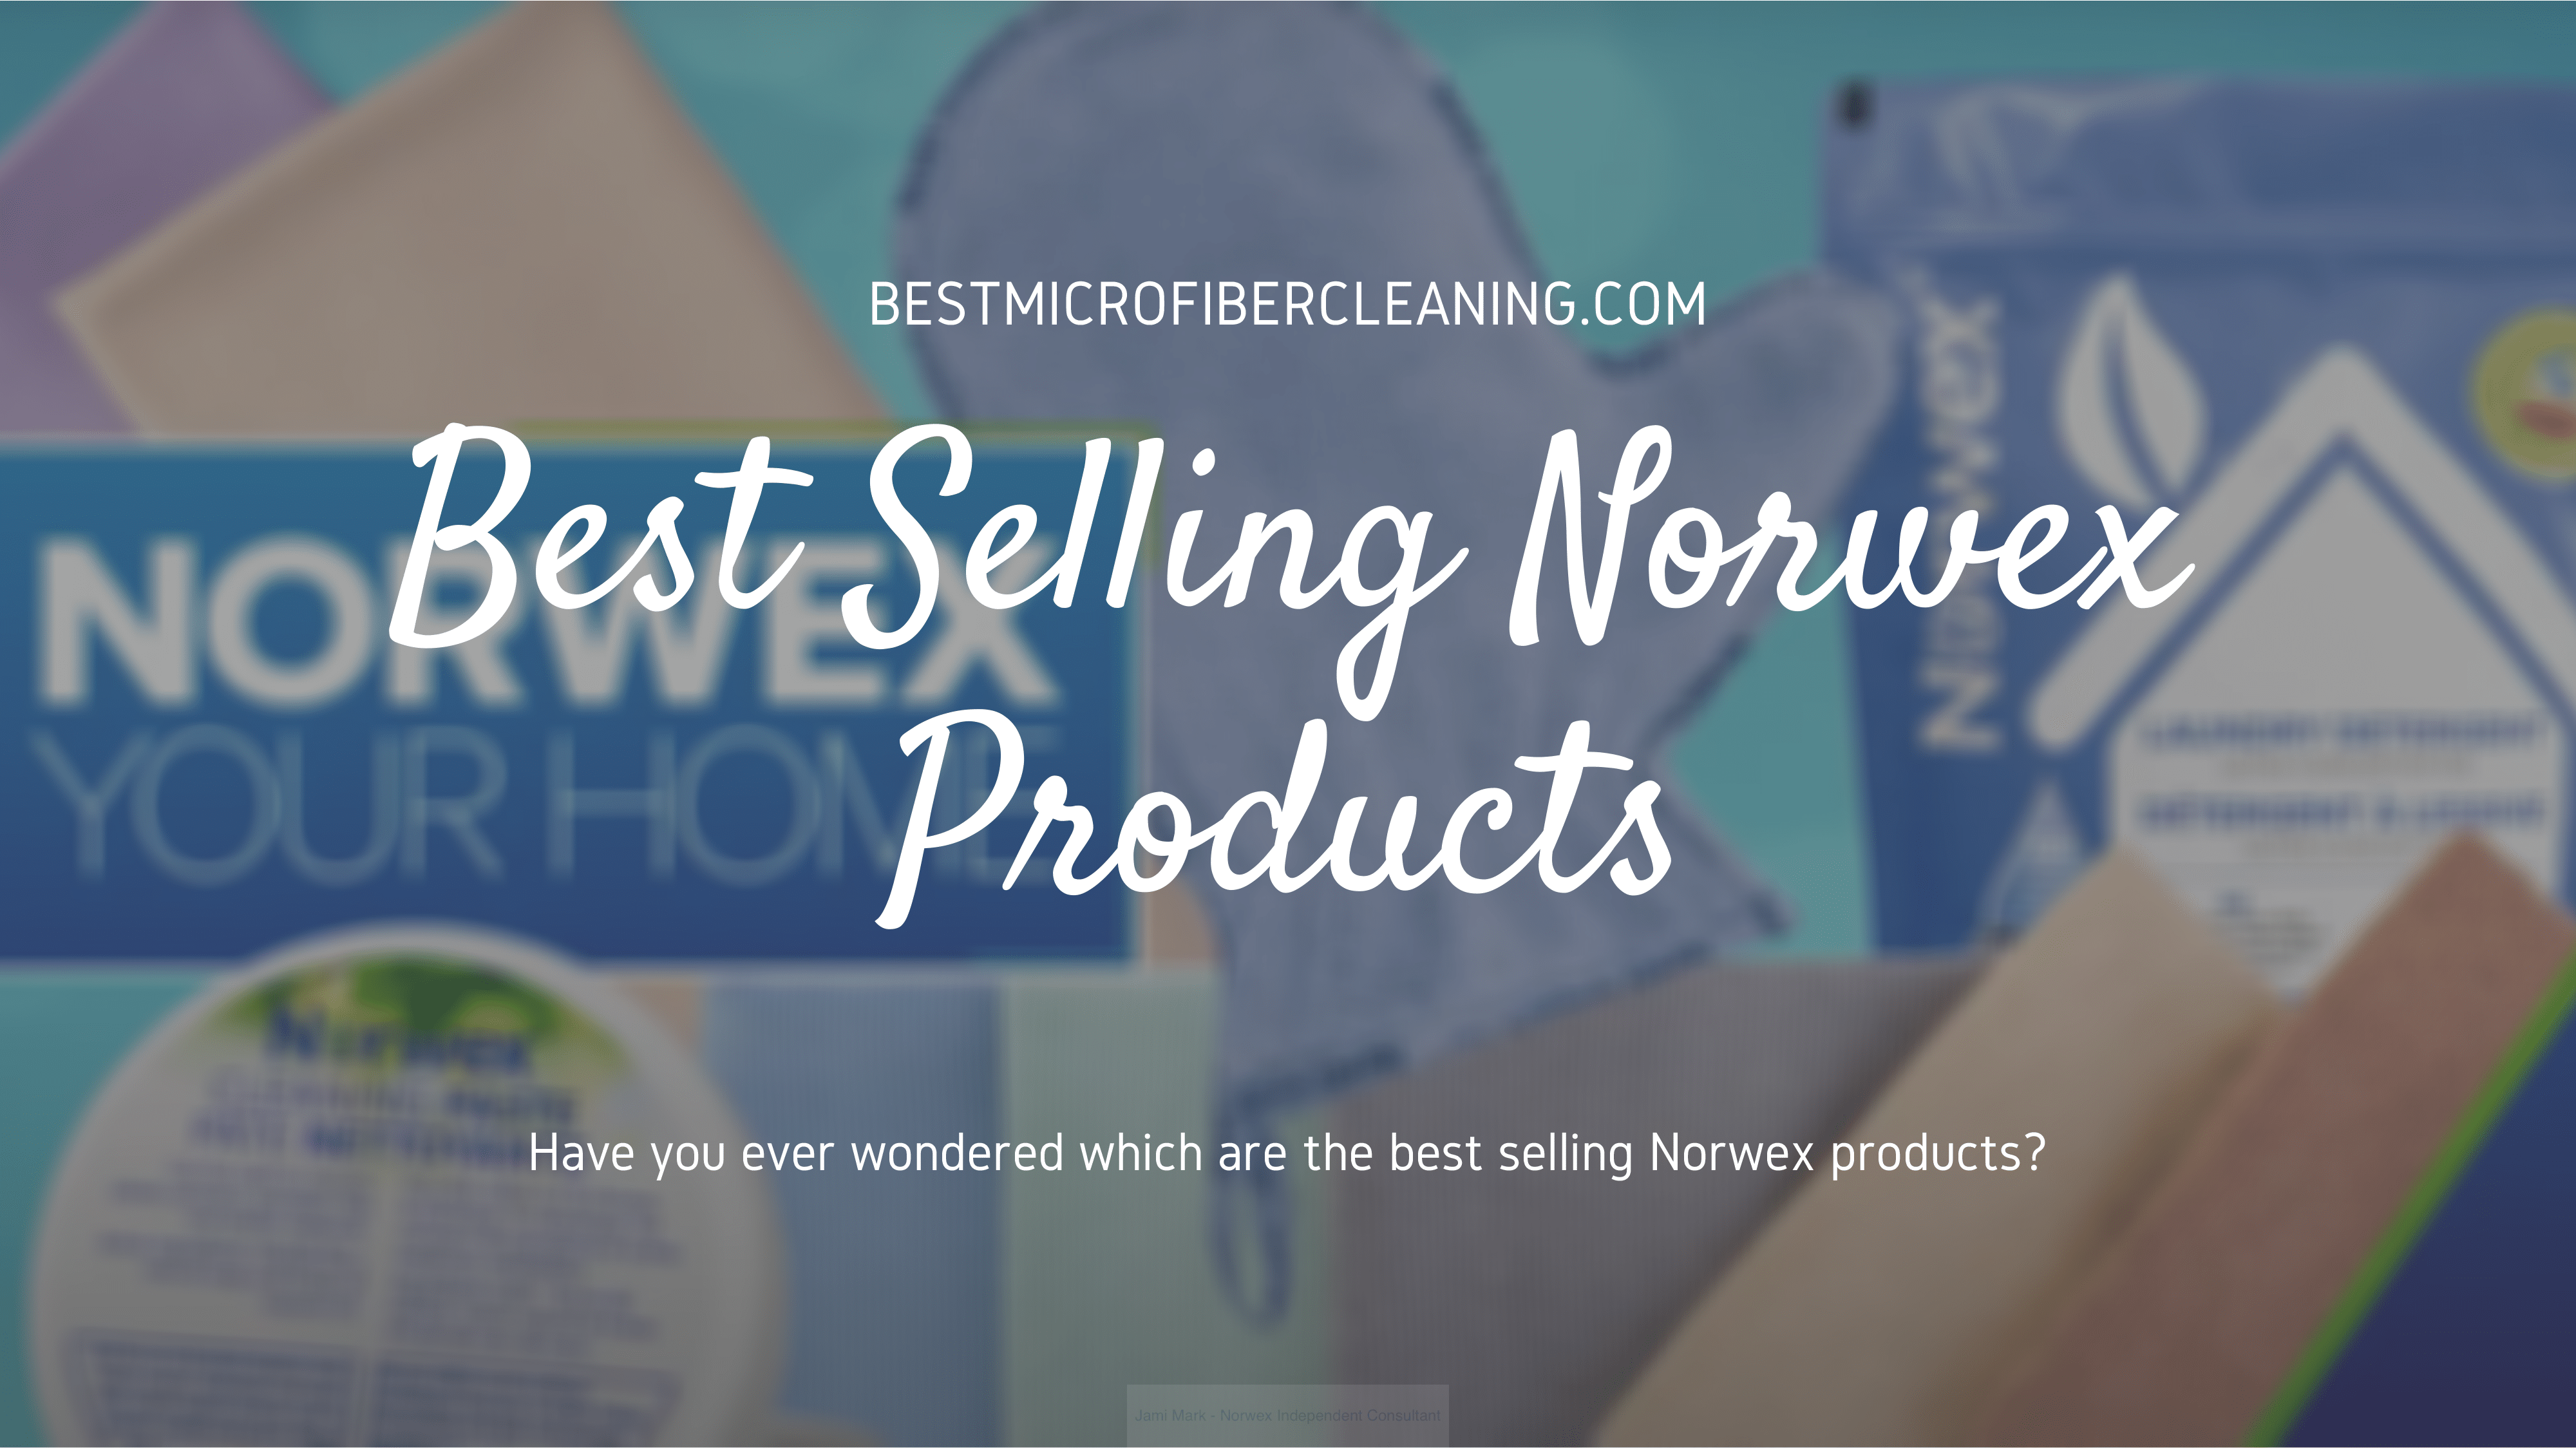 Best Selling Norwex Products - Which Ones Make the Top 10?